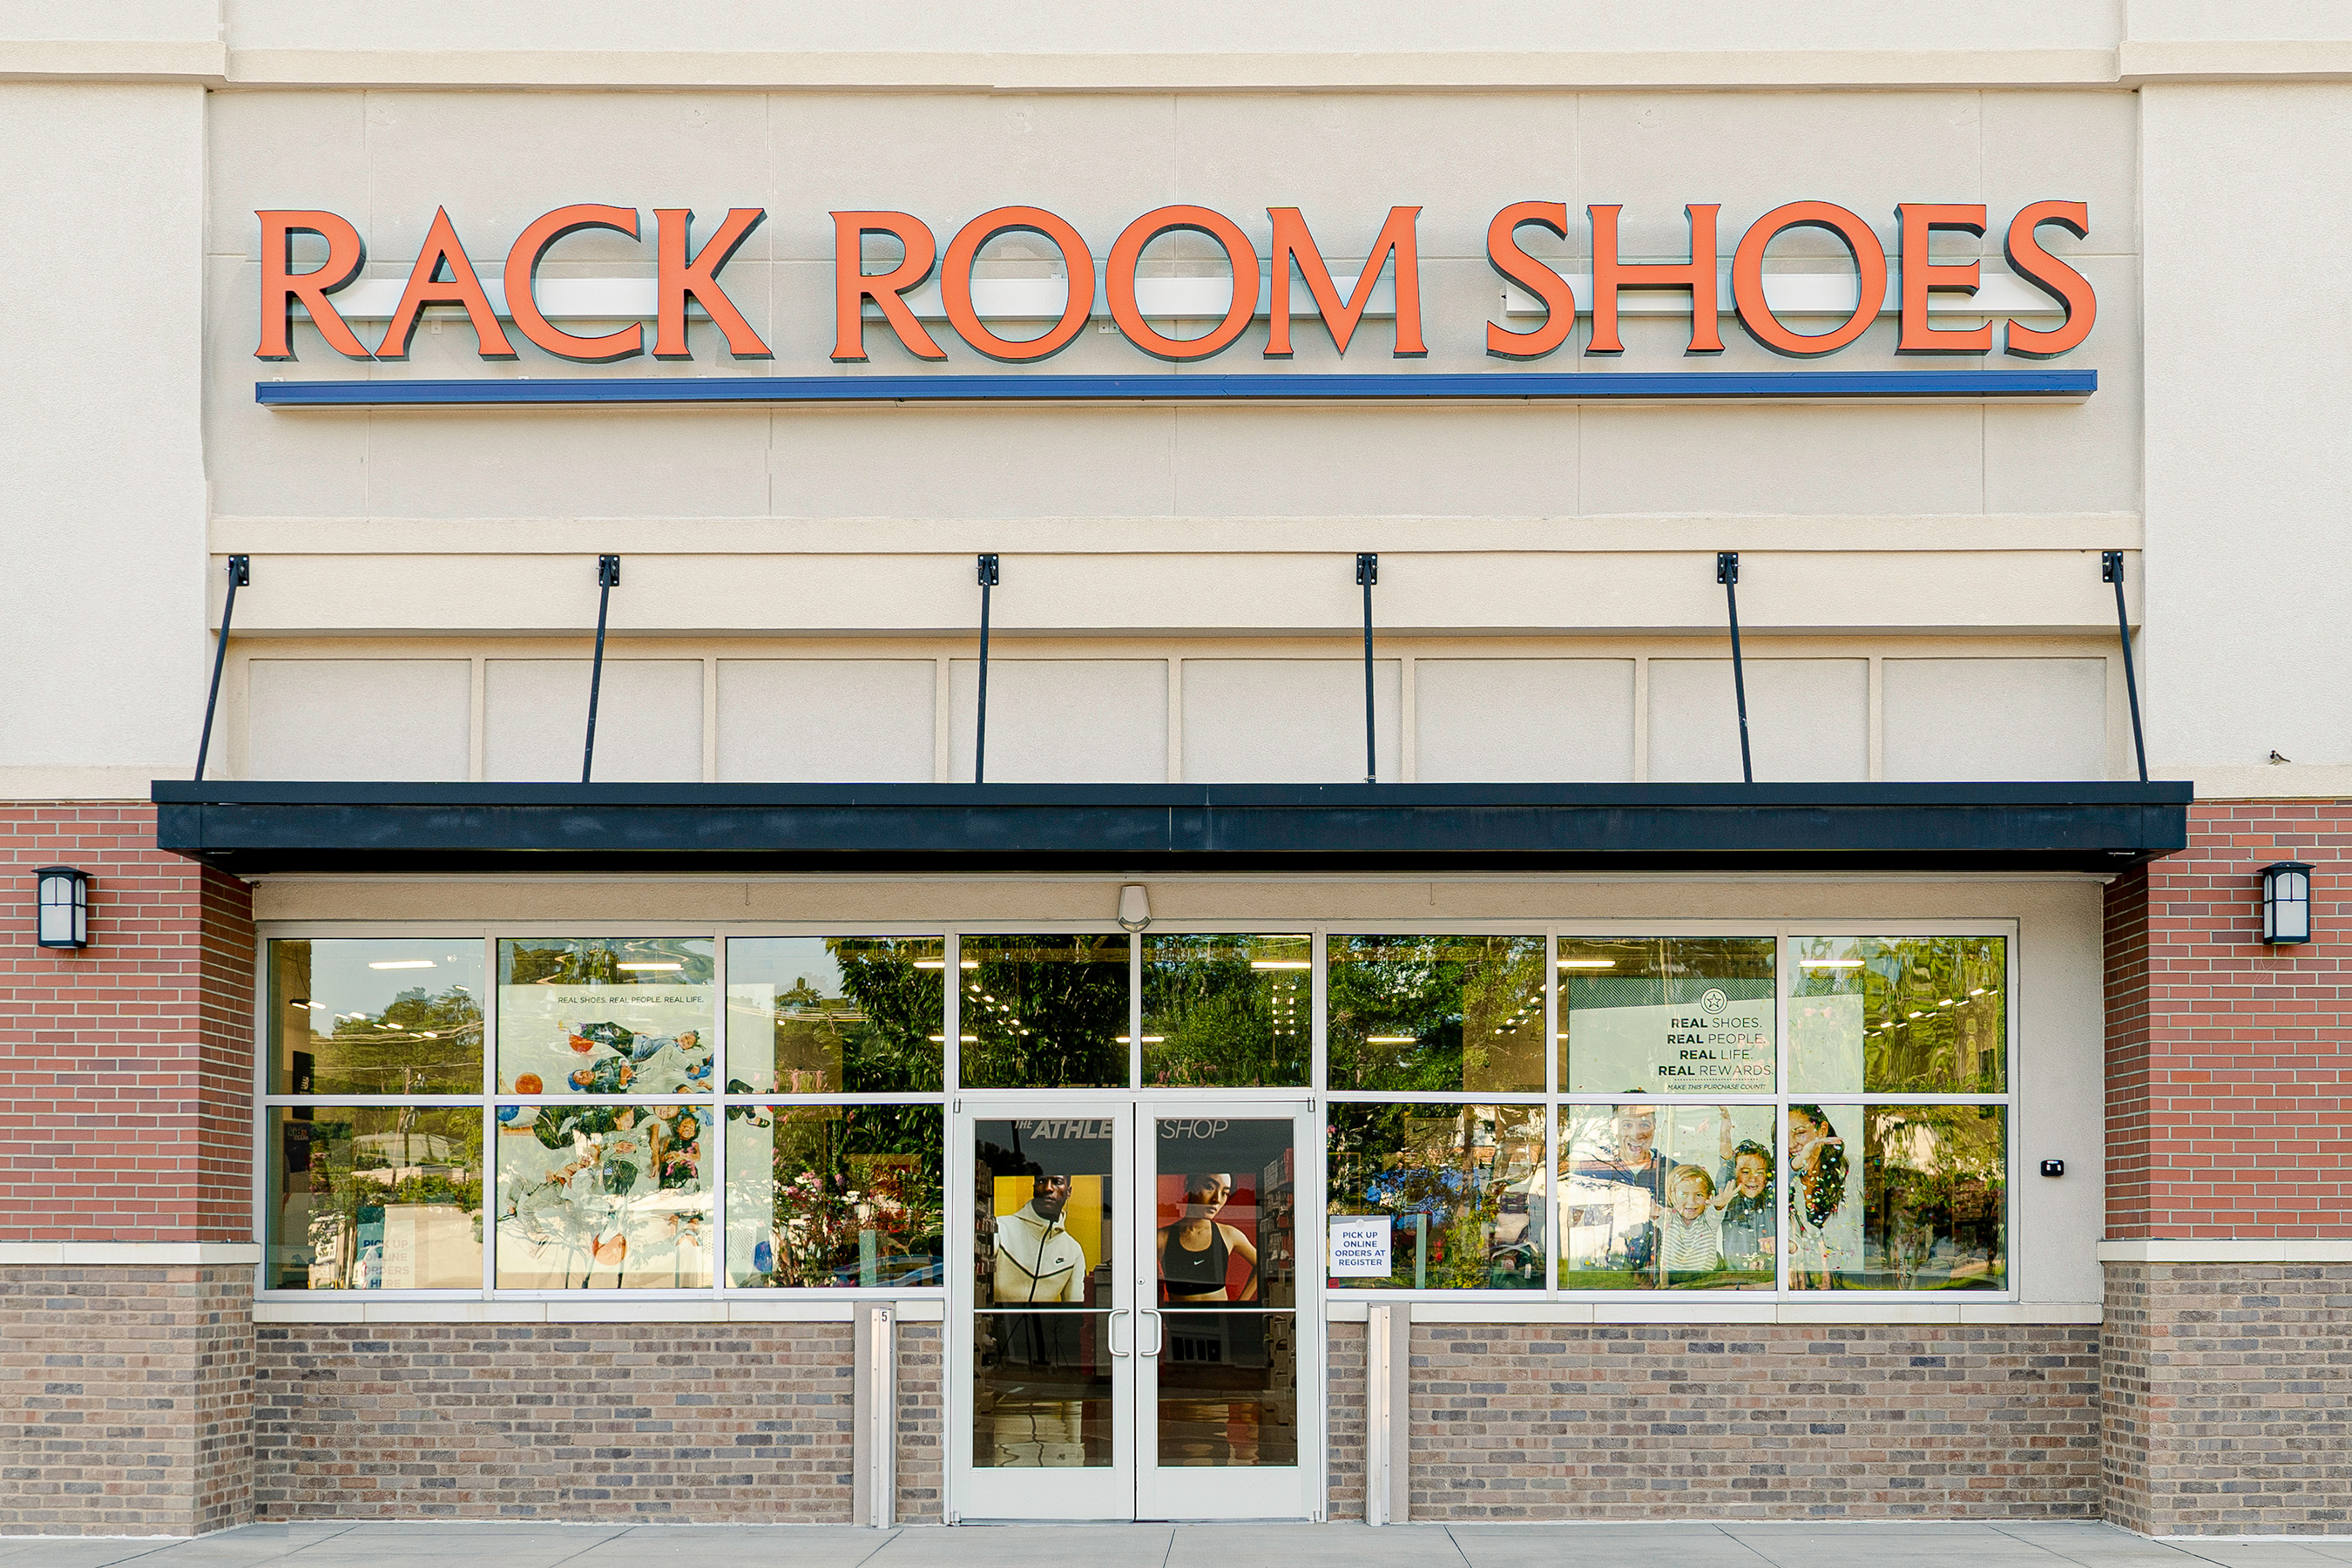 Rack Room Shoes operates more than 500 locations in 36 states with nearly 6,000 associates in stores and the corporate office.